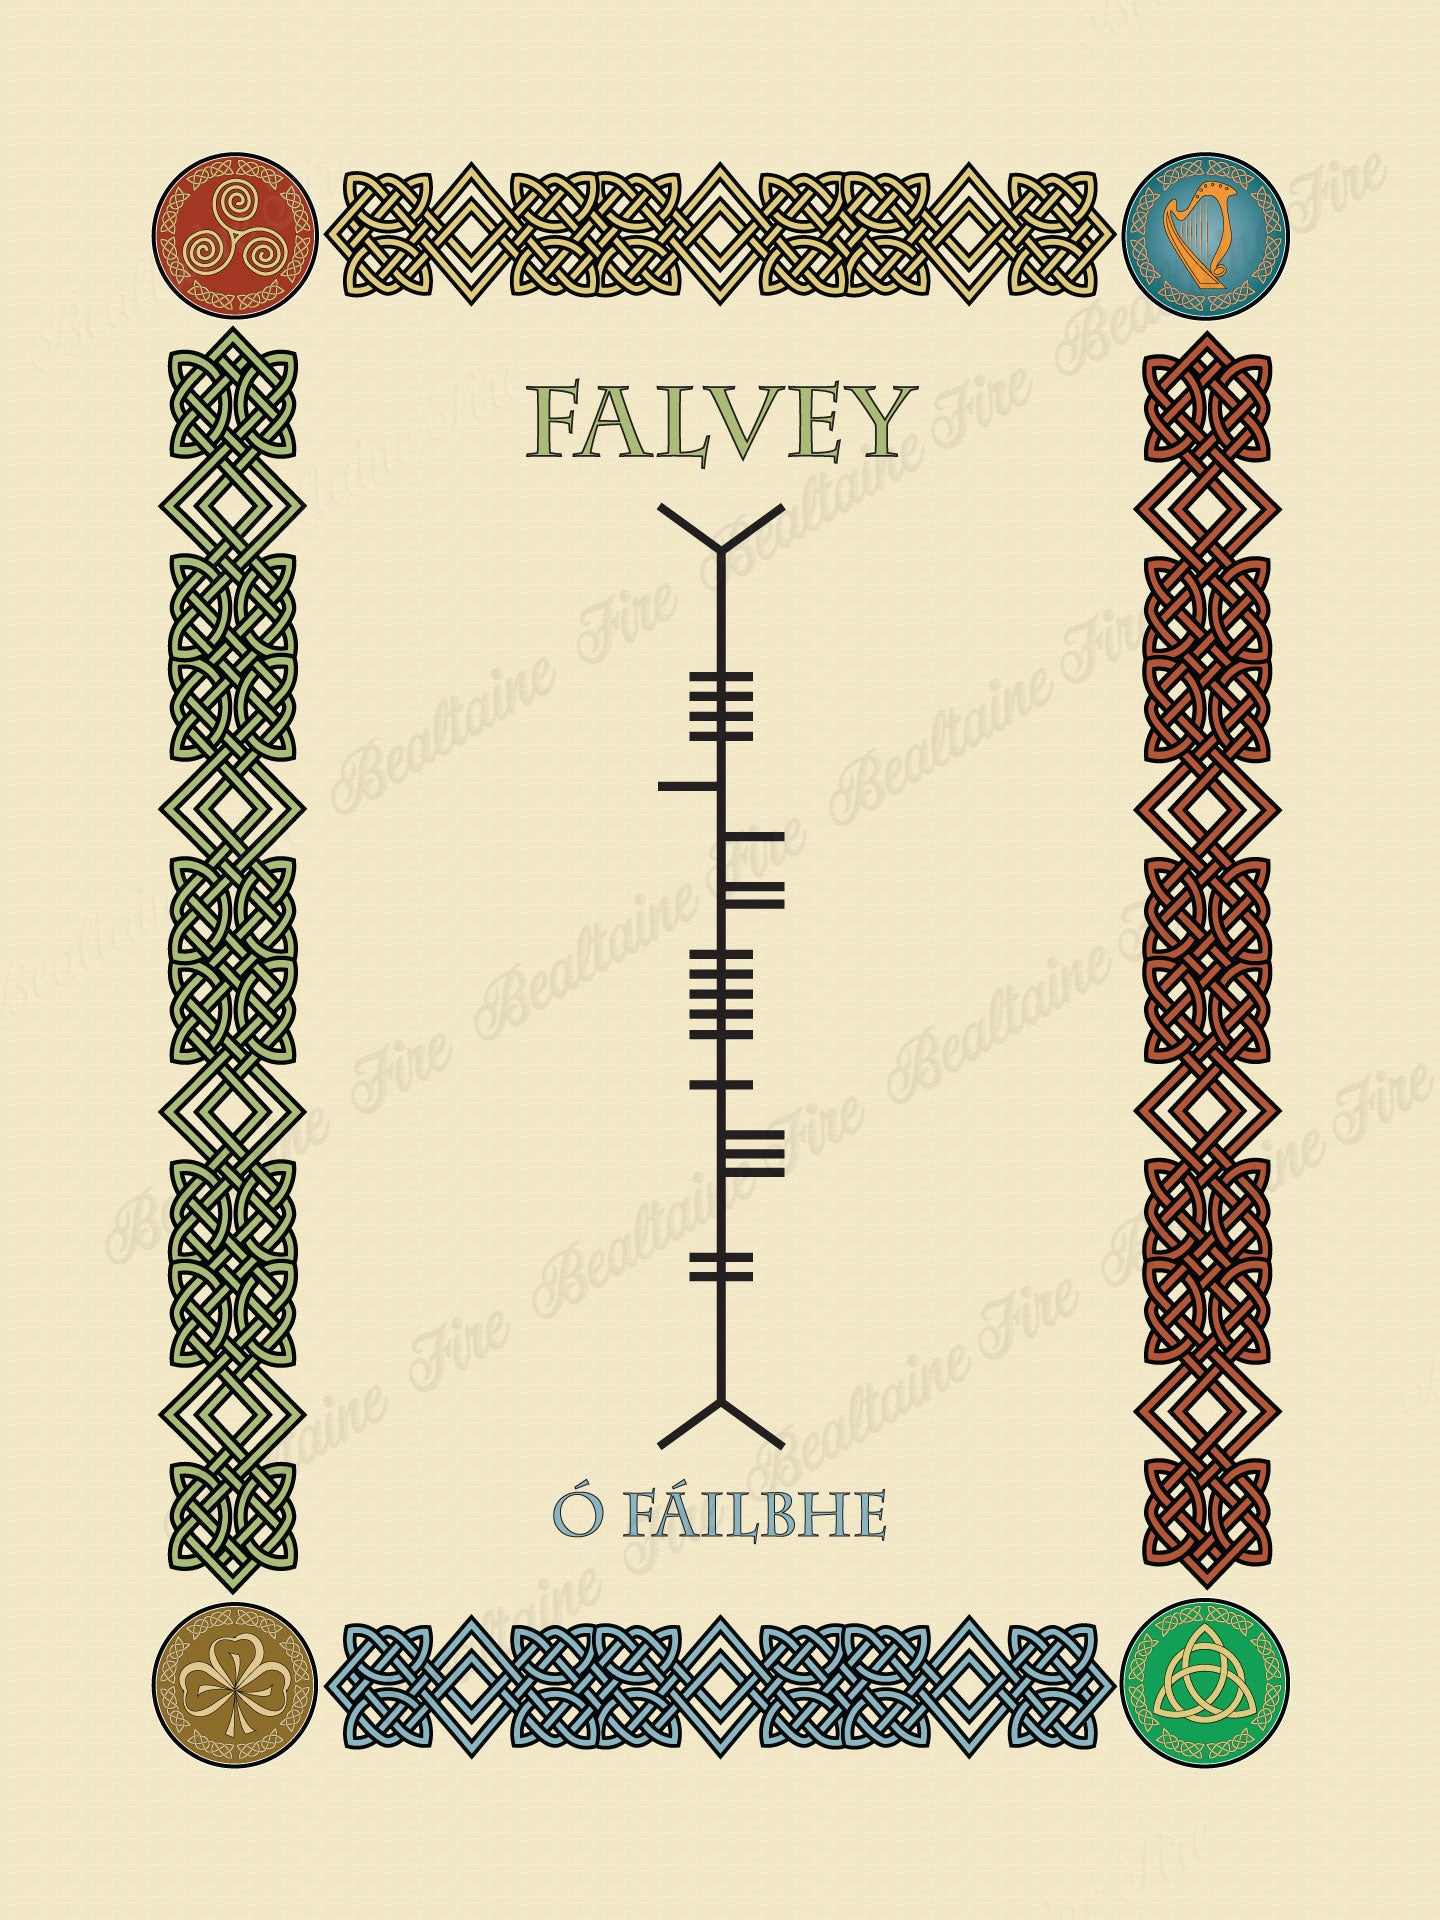 Falvey in Old Irish and Ogham - Premium luster unframed print